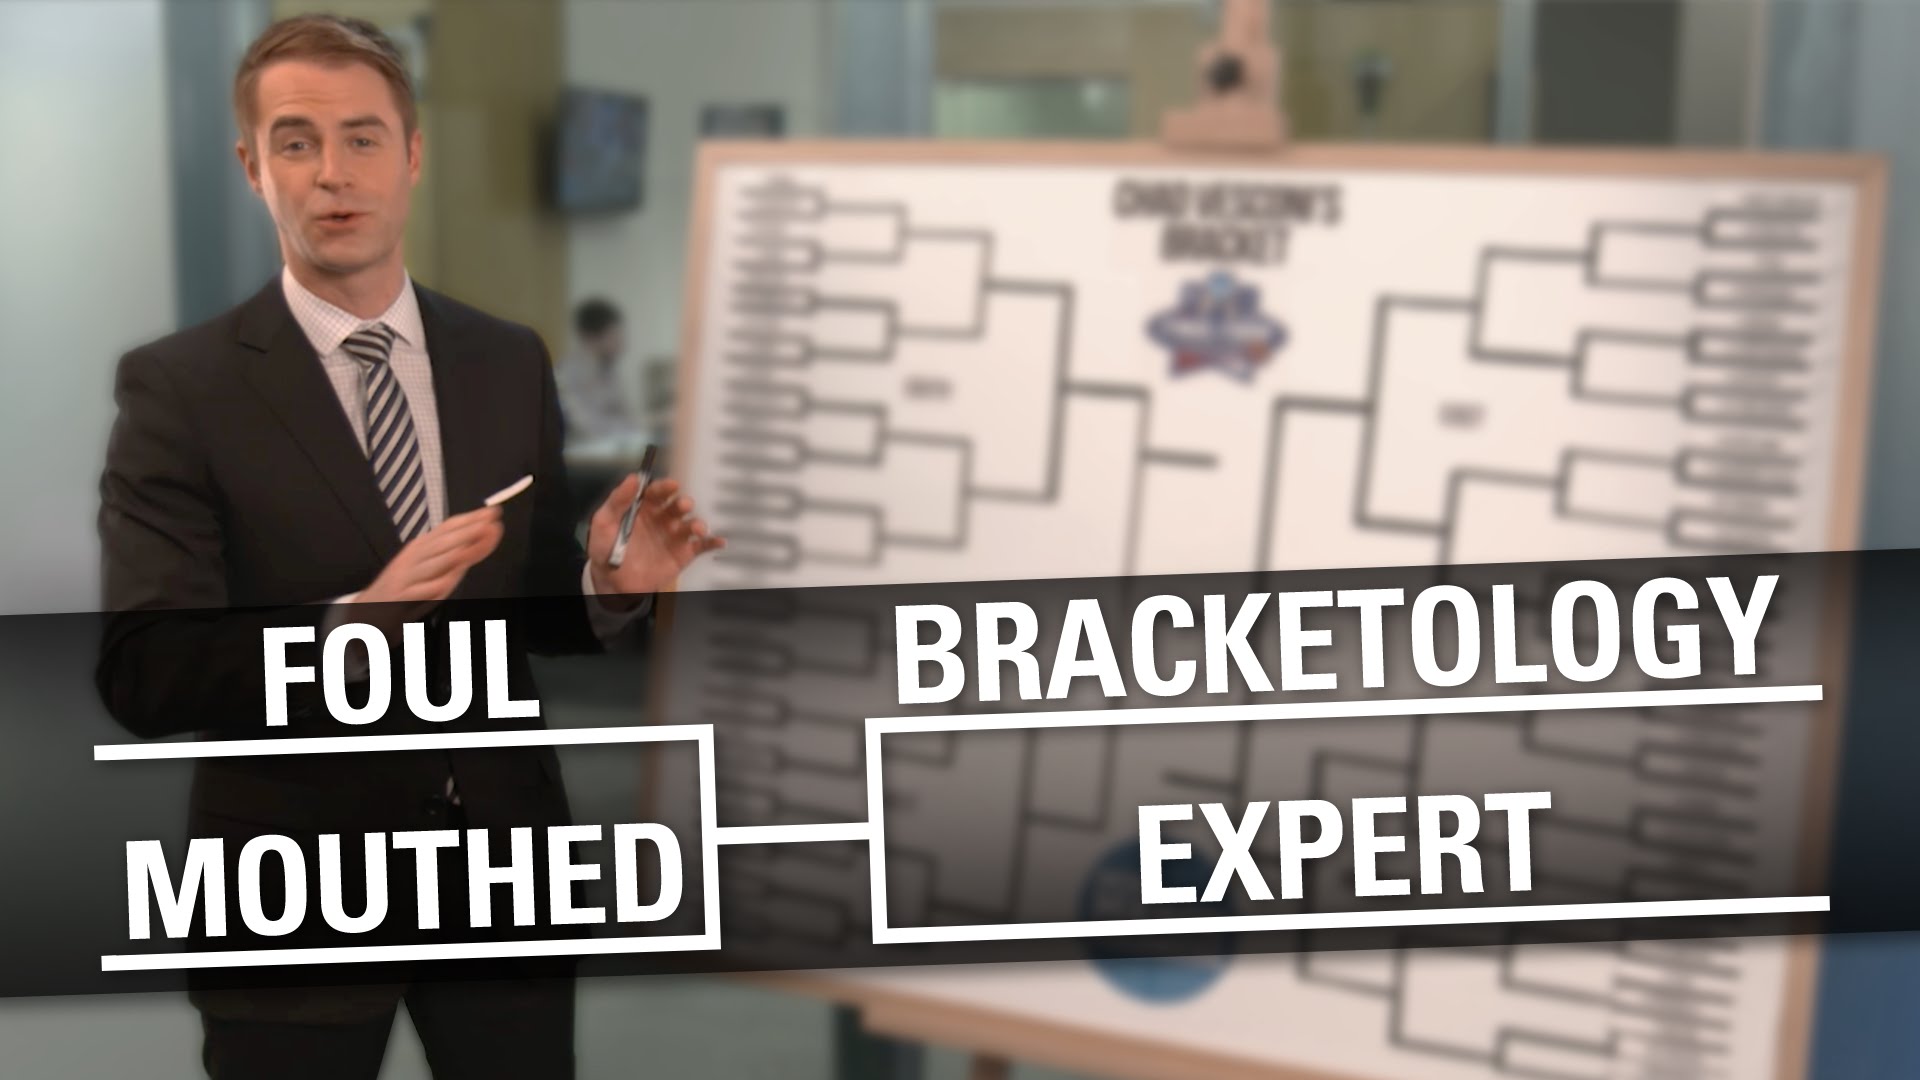 Hilarious: Completely honest March Madness bracketology analysis